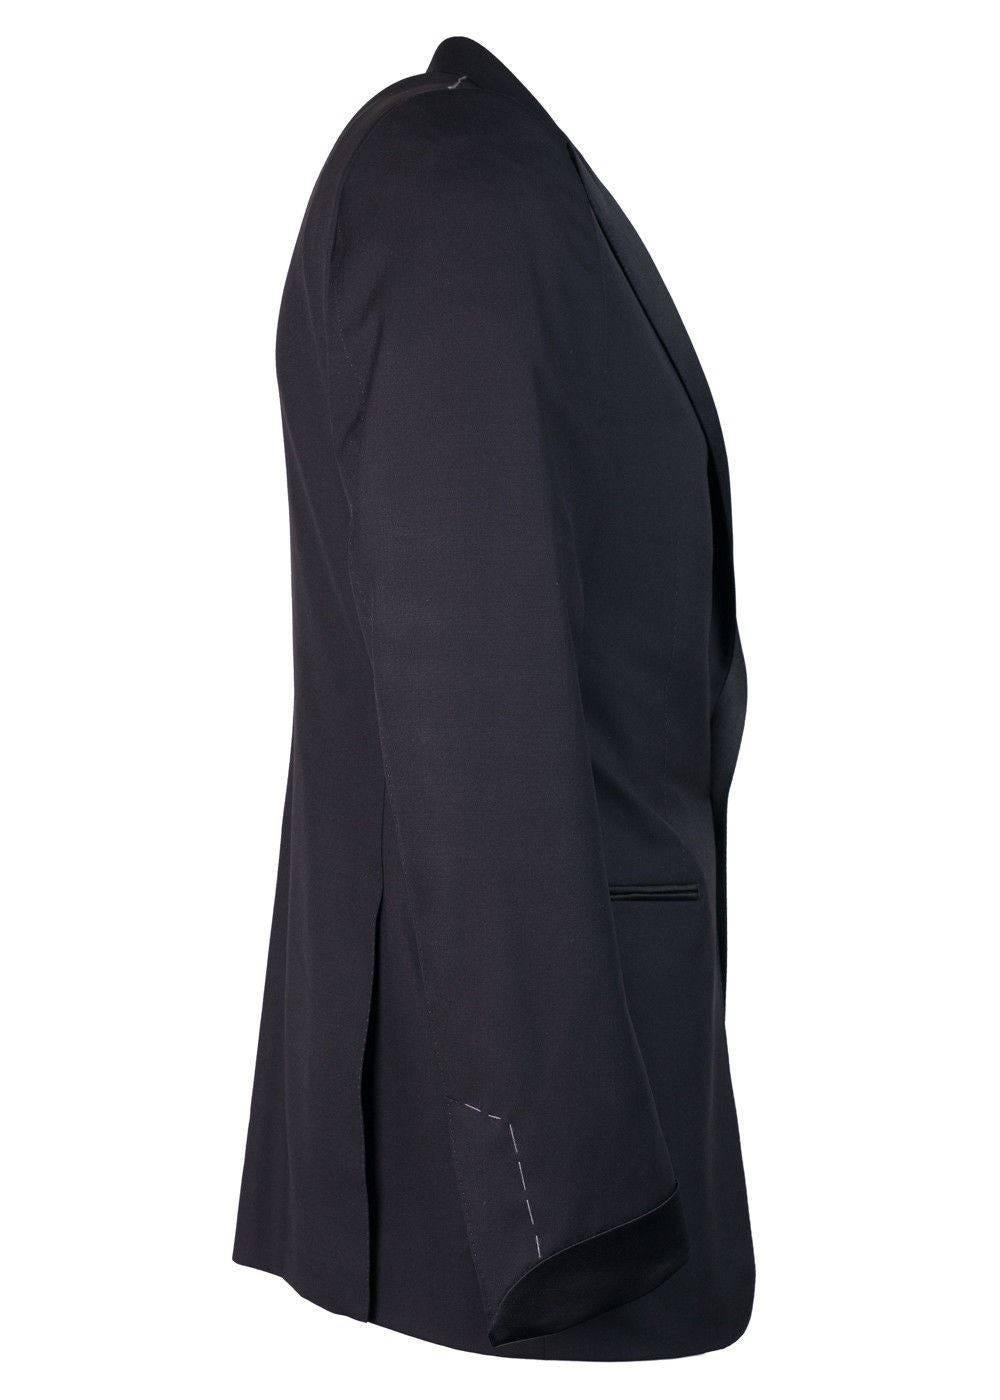 Brand New Tom Ford Shelton 2 Piece Suit
Original Tags & Hanger Included
Retails in Stores & Online for $4400
Size EUR 60R / US 50 Fits True to Size

Tom Ford's Shelton suit is ideal for that special occasion. This suit infuses high quality wool,